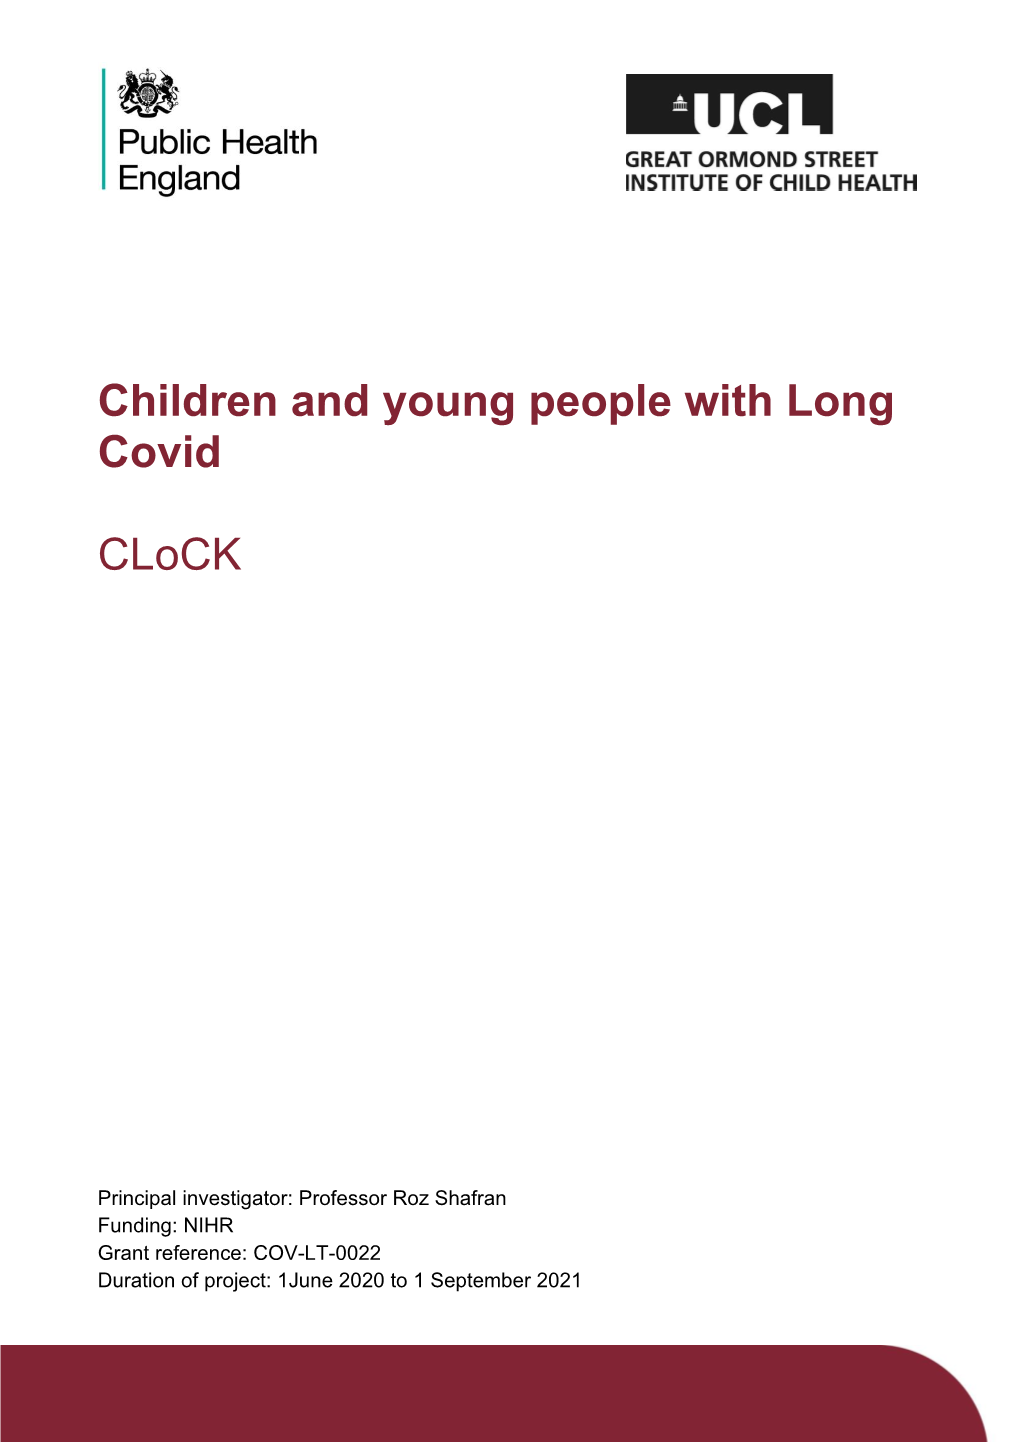 Children and Young People with Long Covid (Clock)